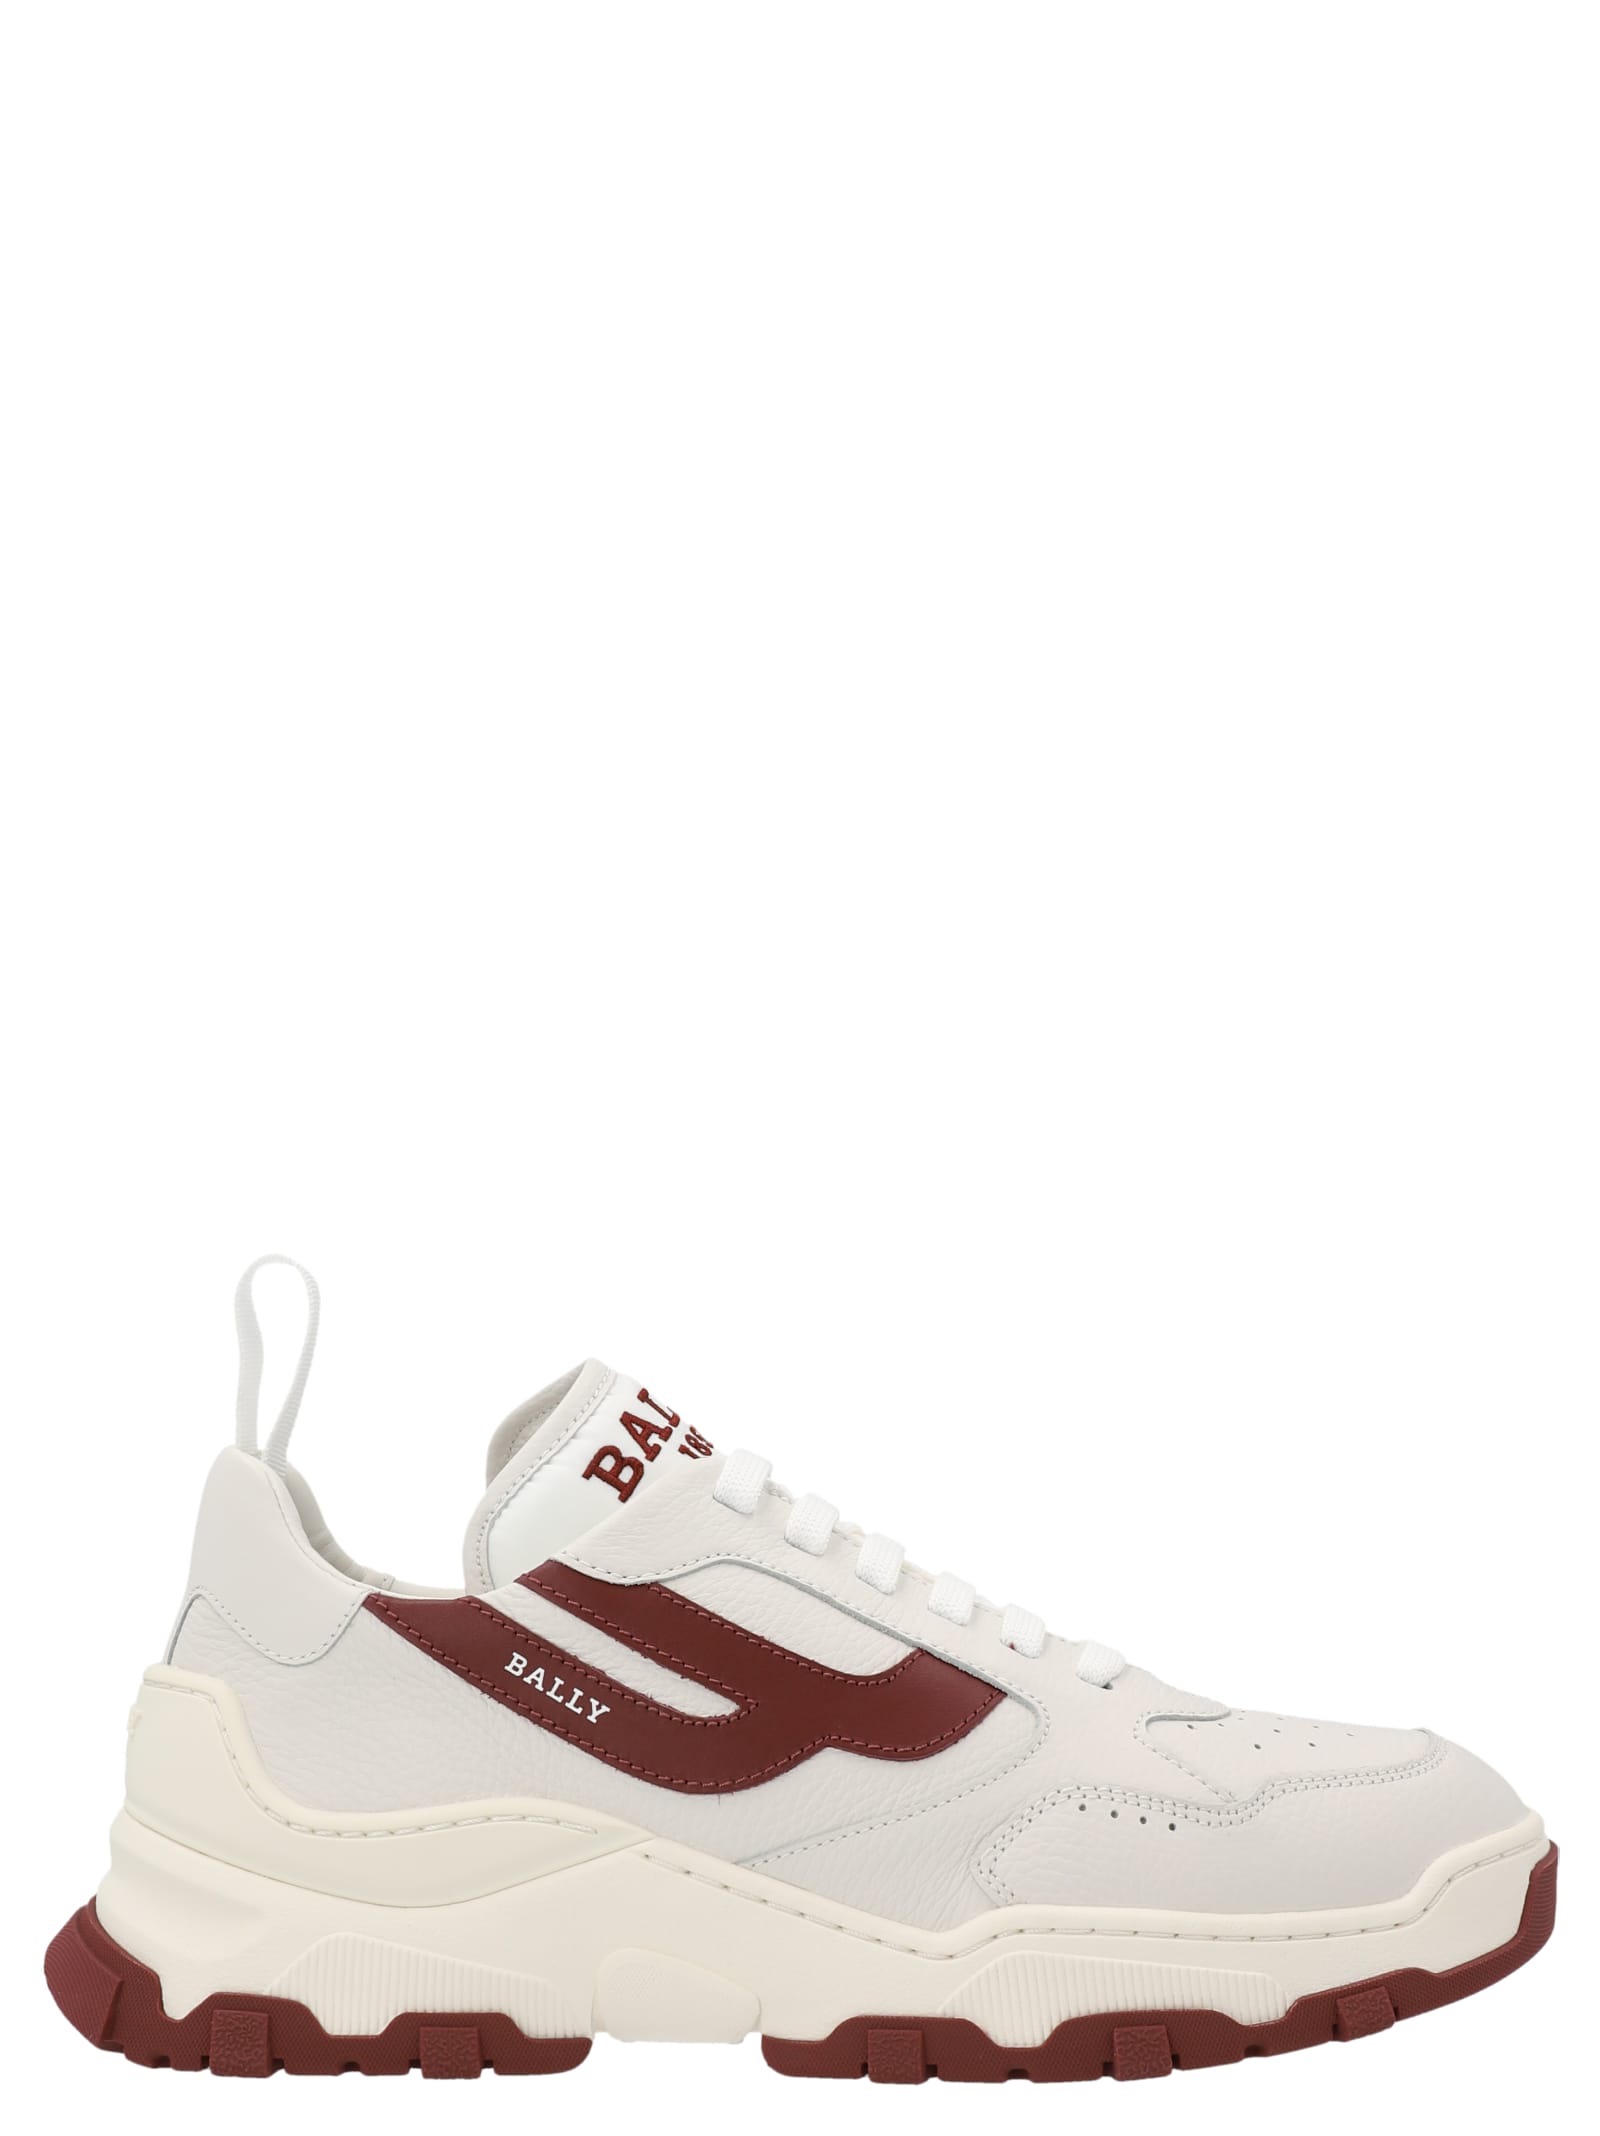 Bally holden T Sneakers